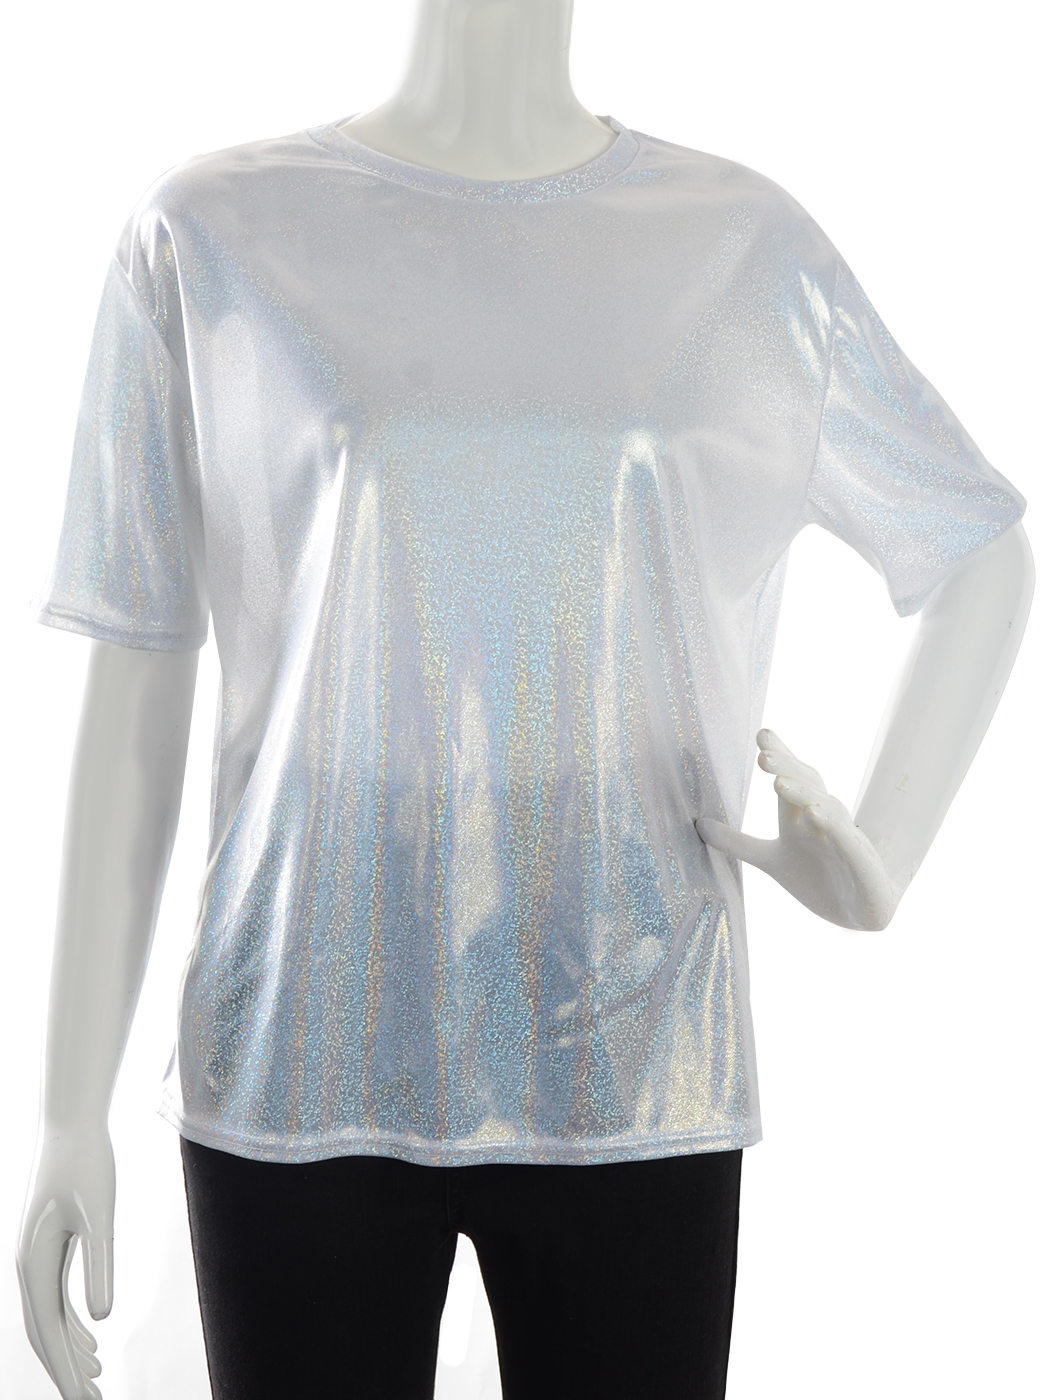 Women's Holographic Metallic Shirt Ultra Soft Top Glitter Party Disco Blouse - image 2 of 6